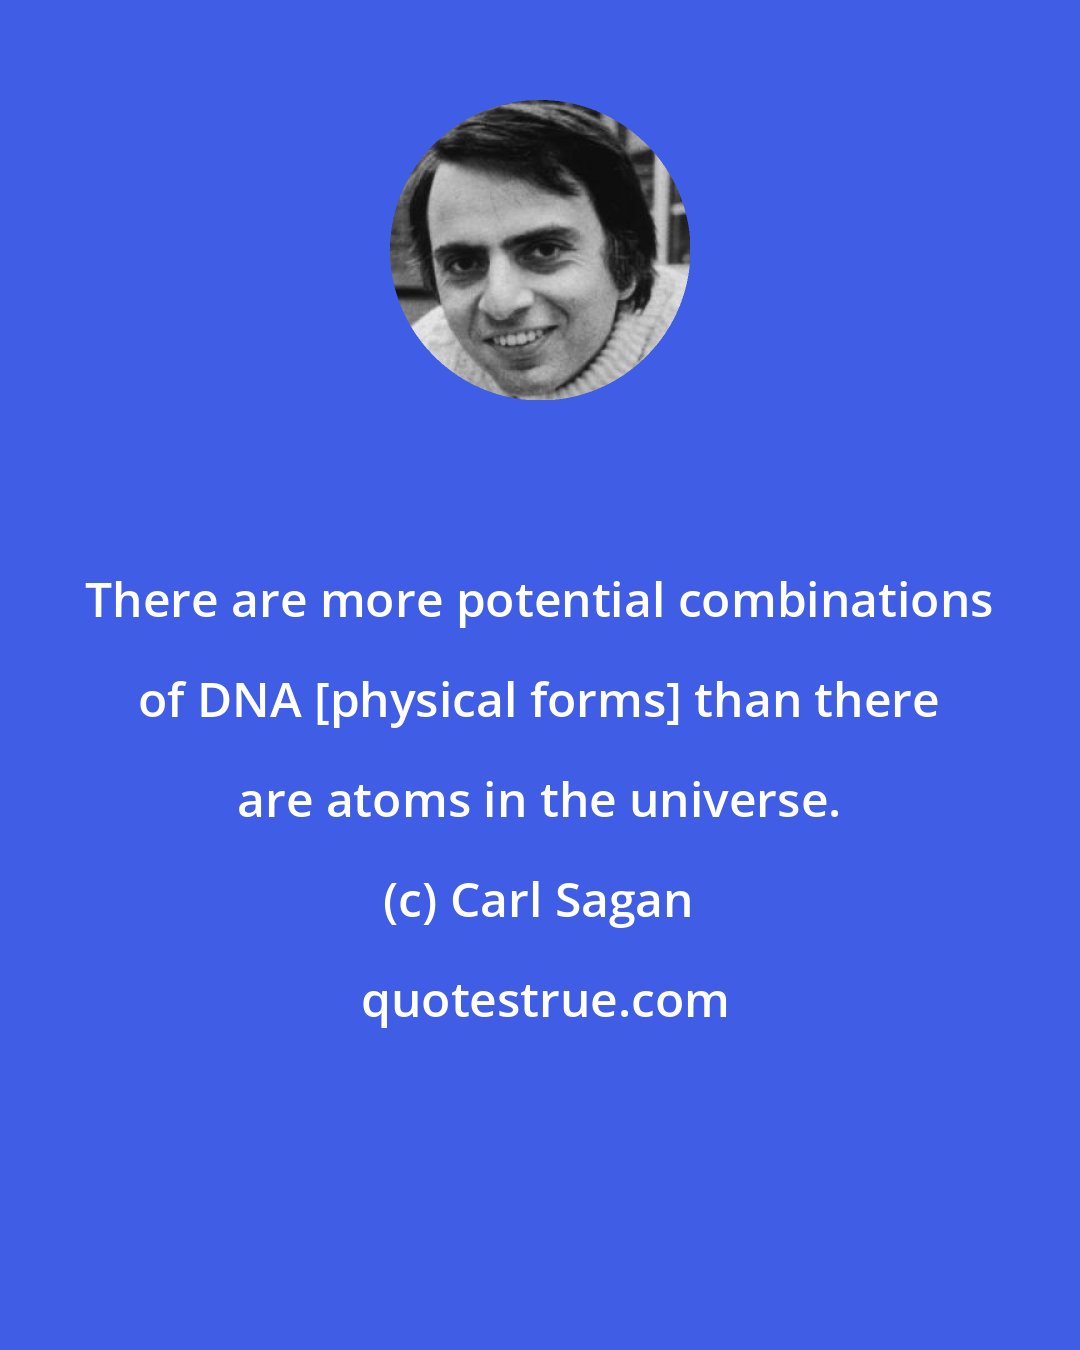 Carl Sagan: There are more potential combinations of DNA [physical forms] than there are atoms in the universe.